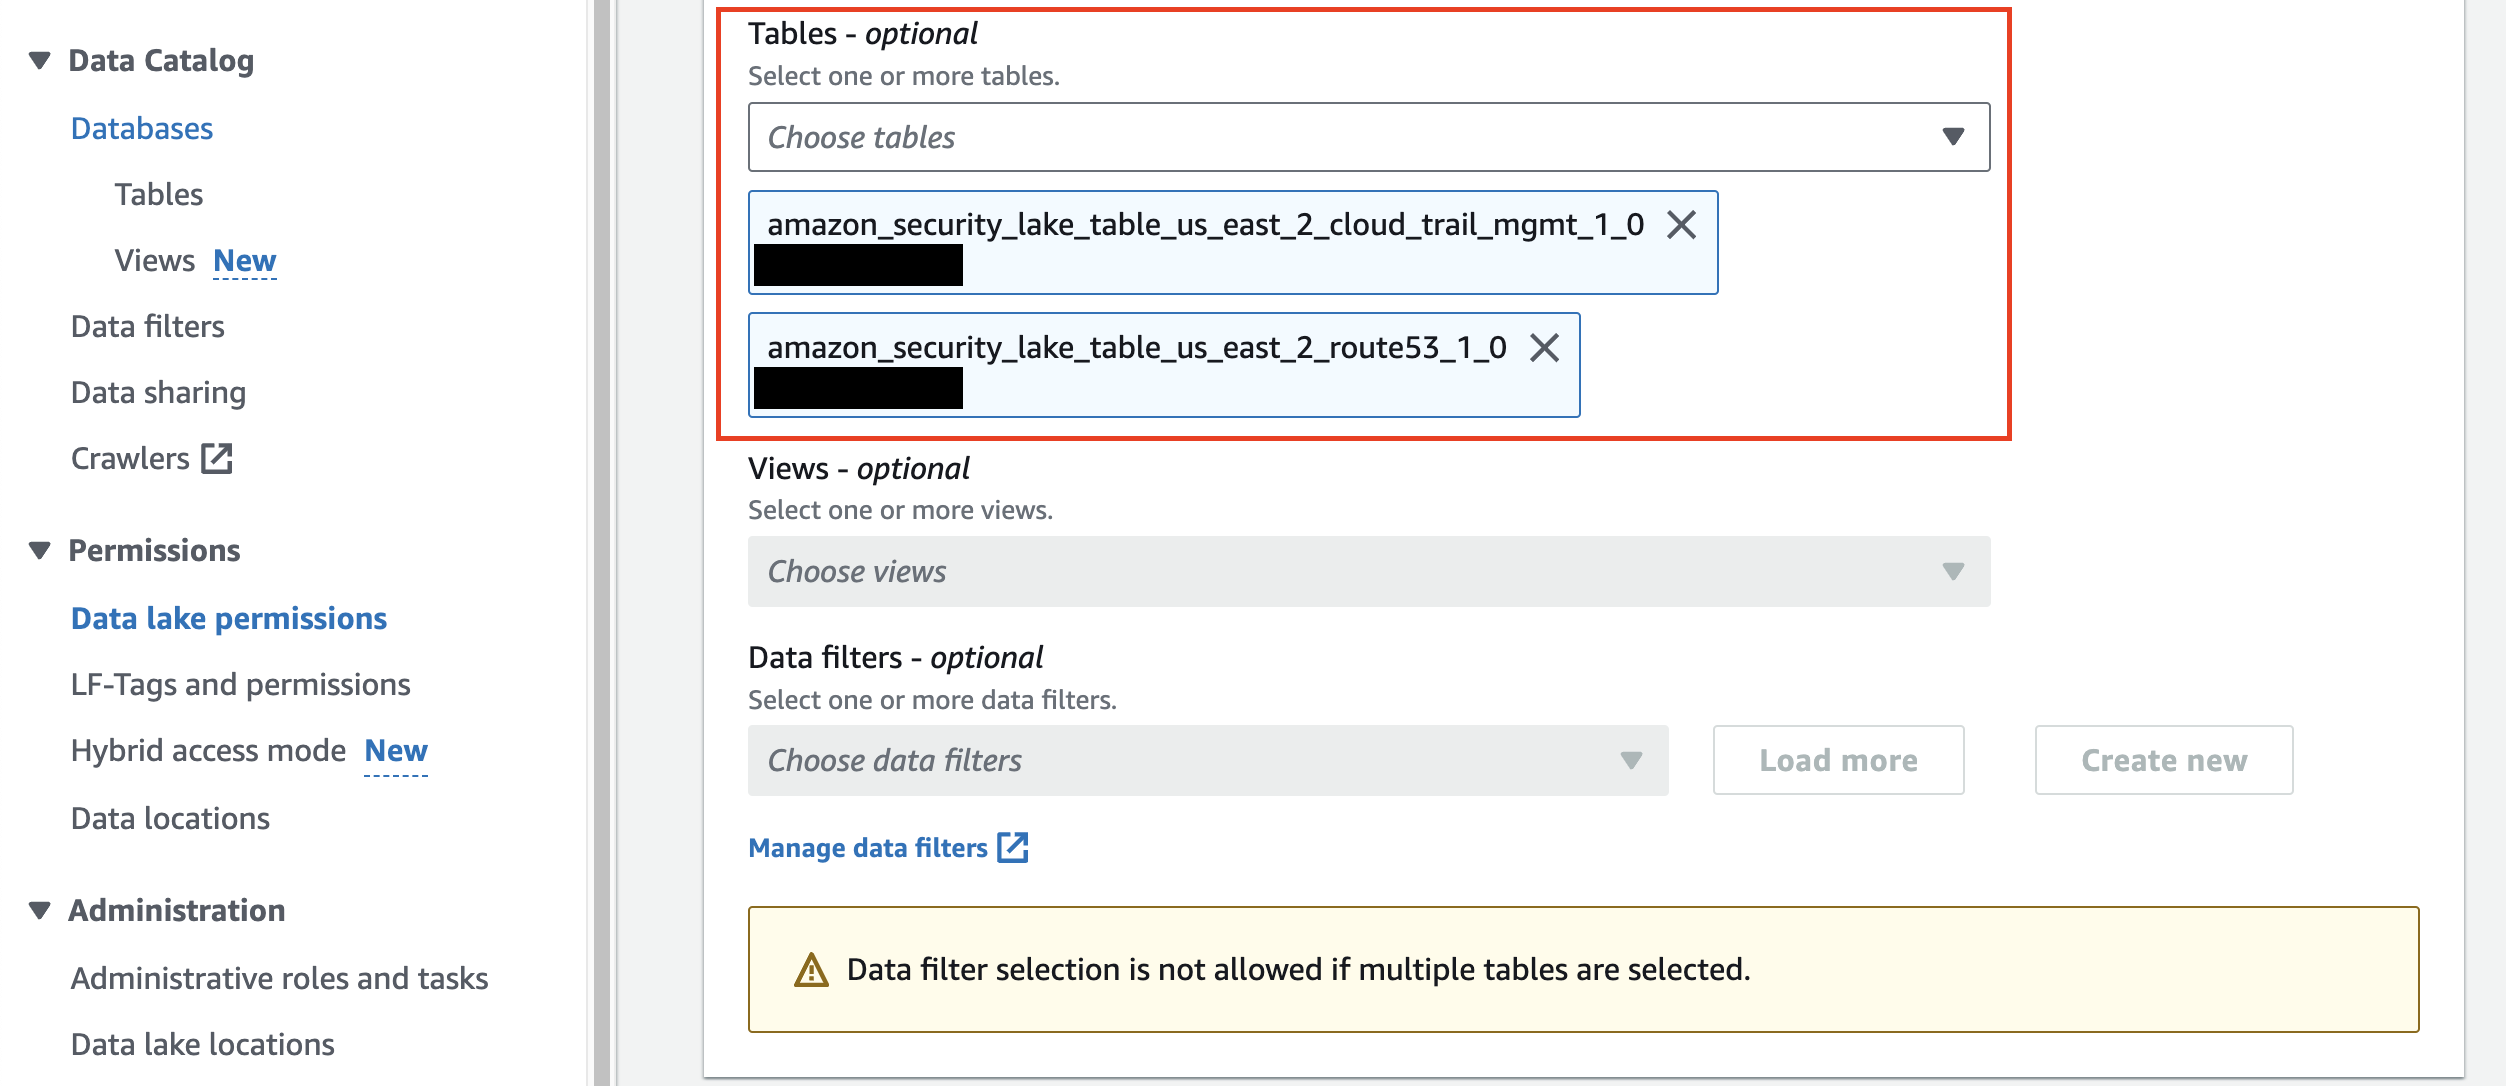 FIG 3. - Select Amazon Security Lake Tables for Lake Formation permissions